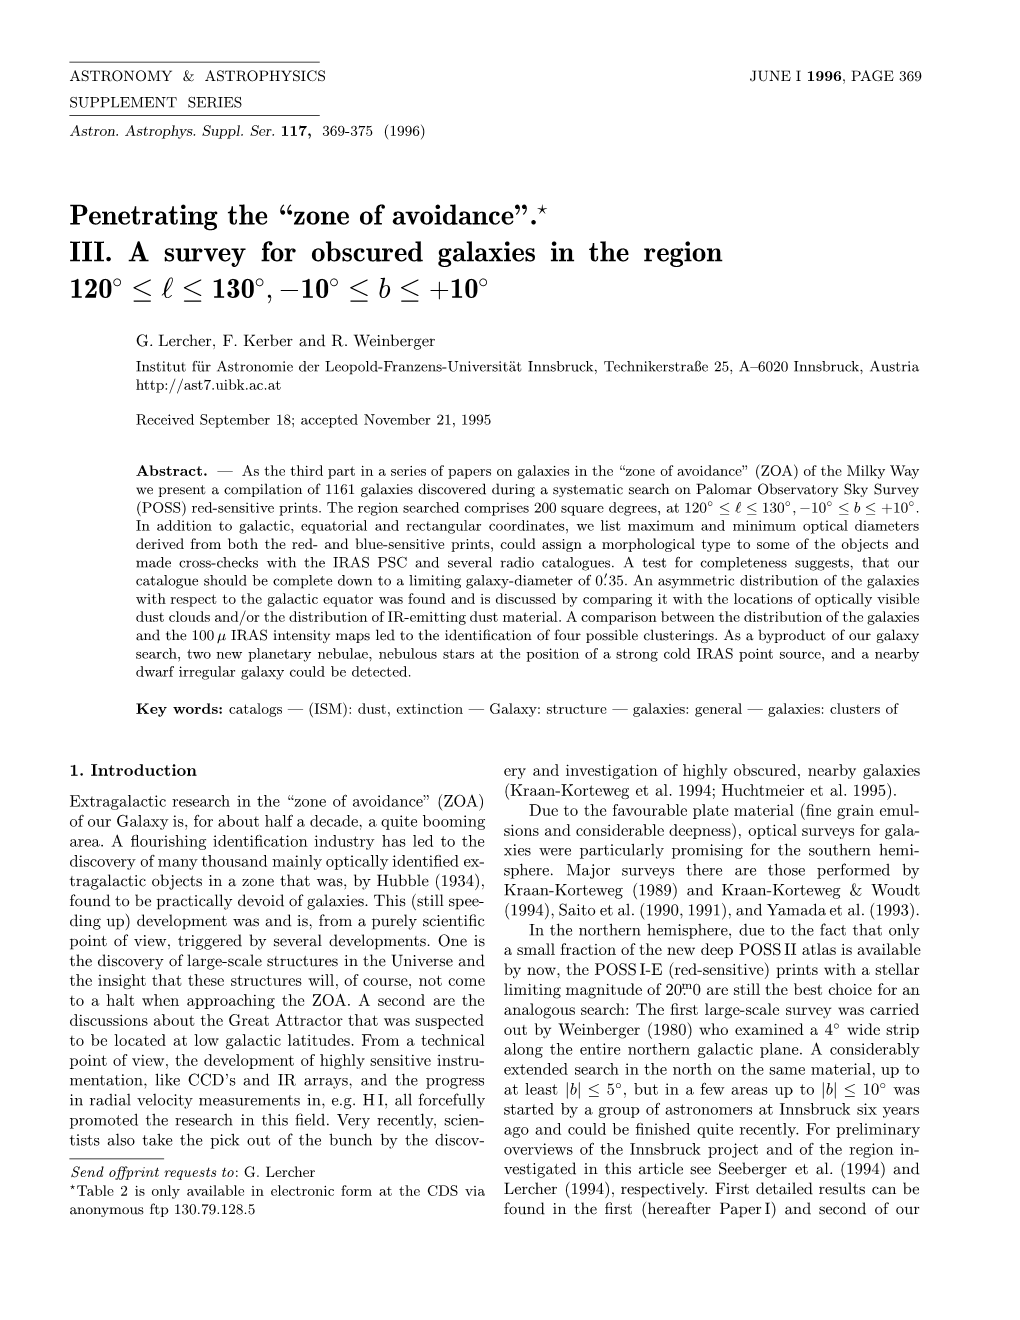 Penetrating the “Zone of Avoidance”. III. a Survey for Obscured Galaxies In